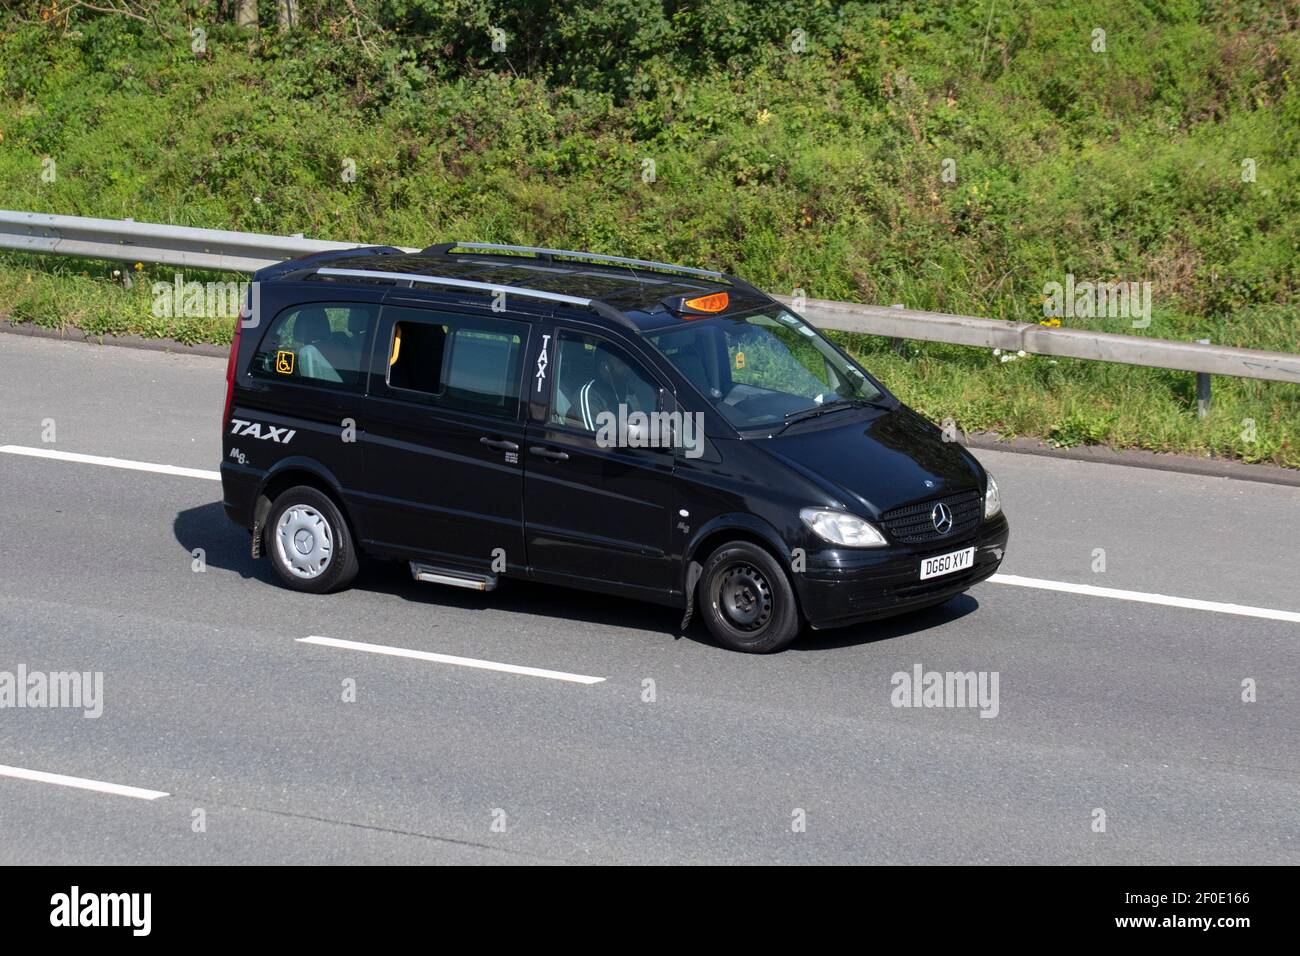 2010 black Mercedes Benz Vito 111 Cdi Compact Traveliner; Vehicular  traffic, moving vehicles, cars, LCV minibus vehicle driving on UK roads,  motors, motoring on the M6 motorway highway road network Stock Photo - Alamy